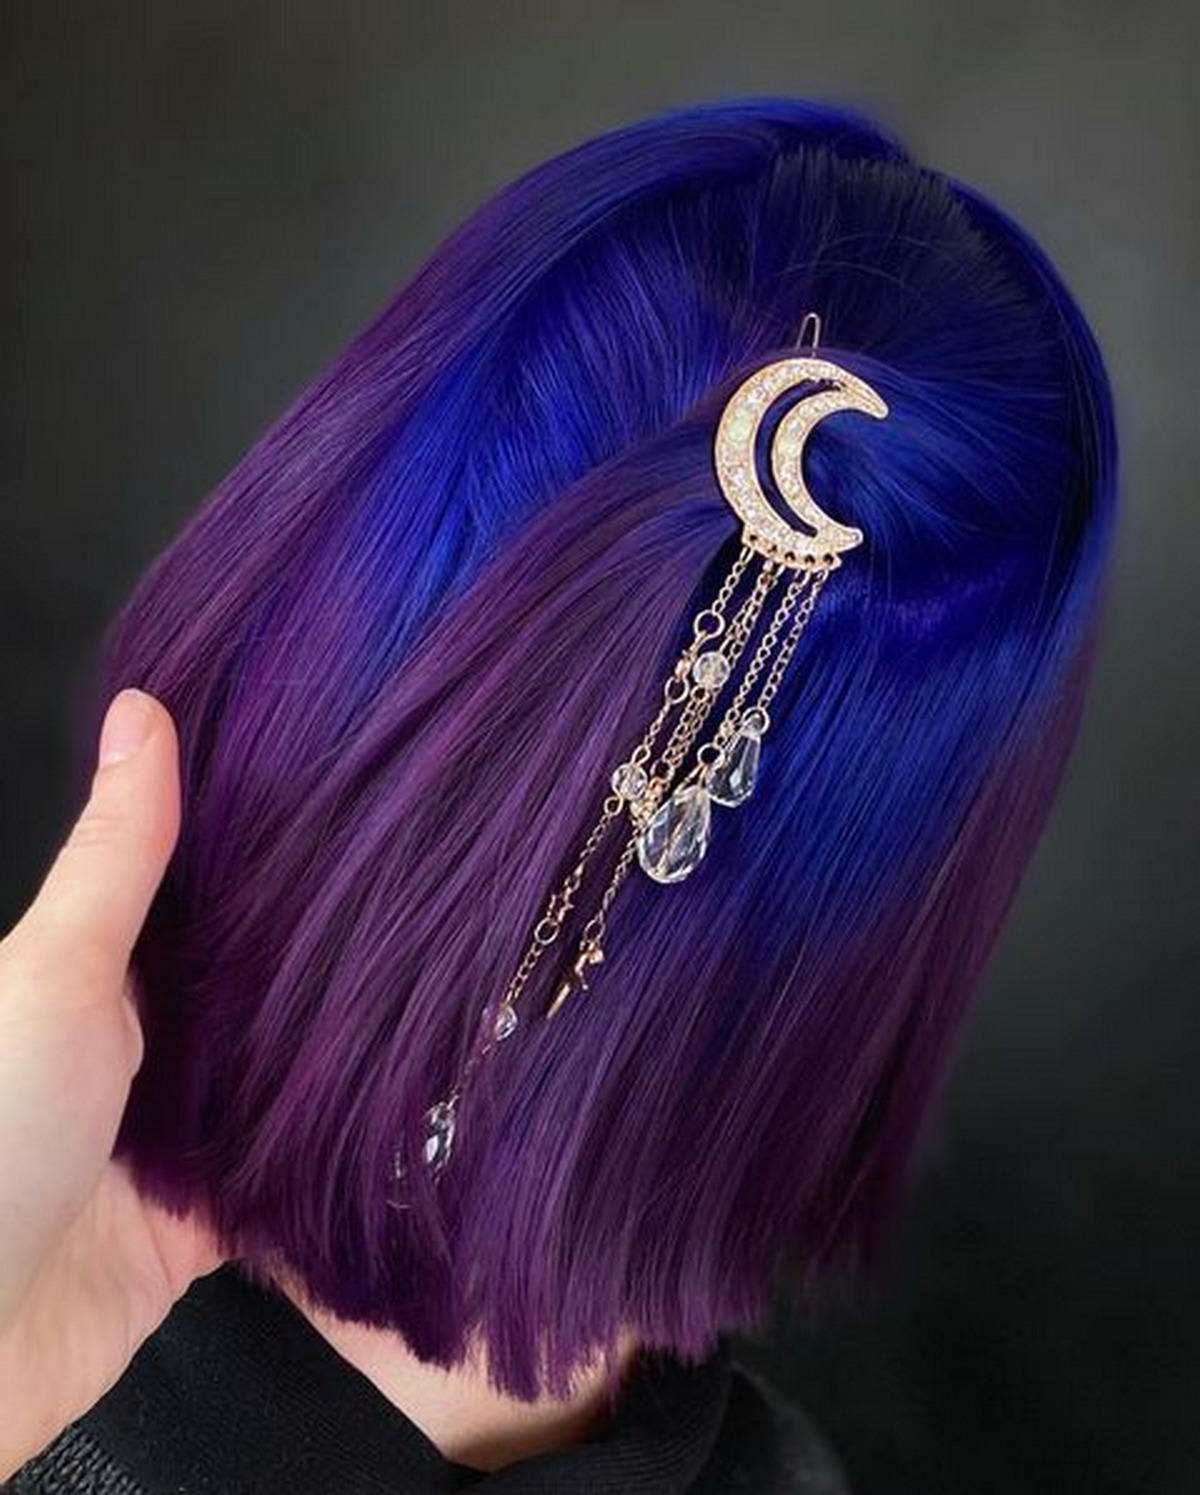 Short Hair with Dark Blue and Purple Ombre